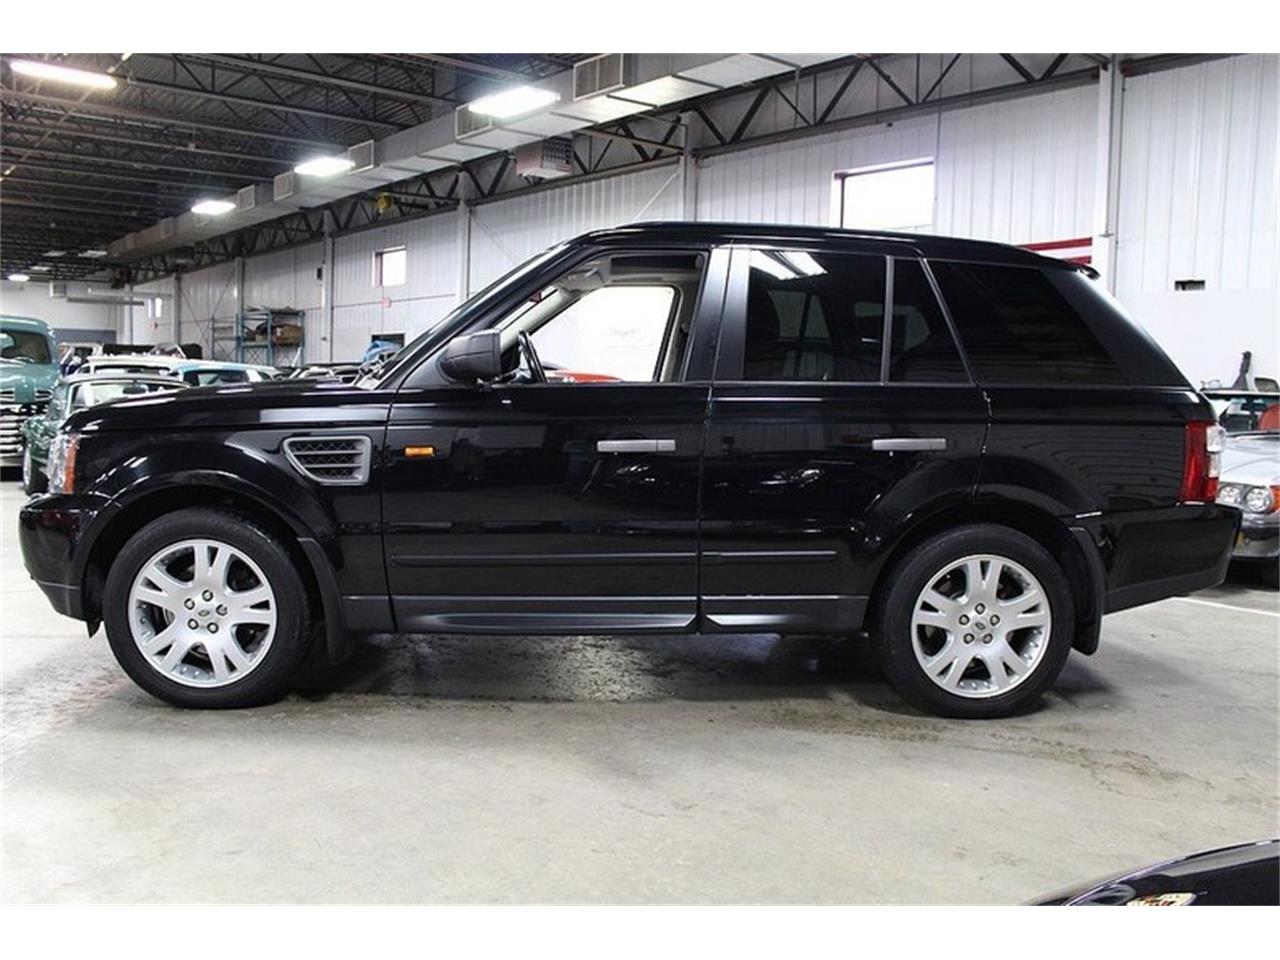 2006 Land Rover Range Rover Sport for Sale | ClassicCars ...